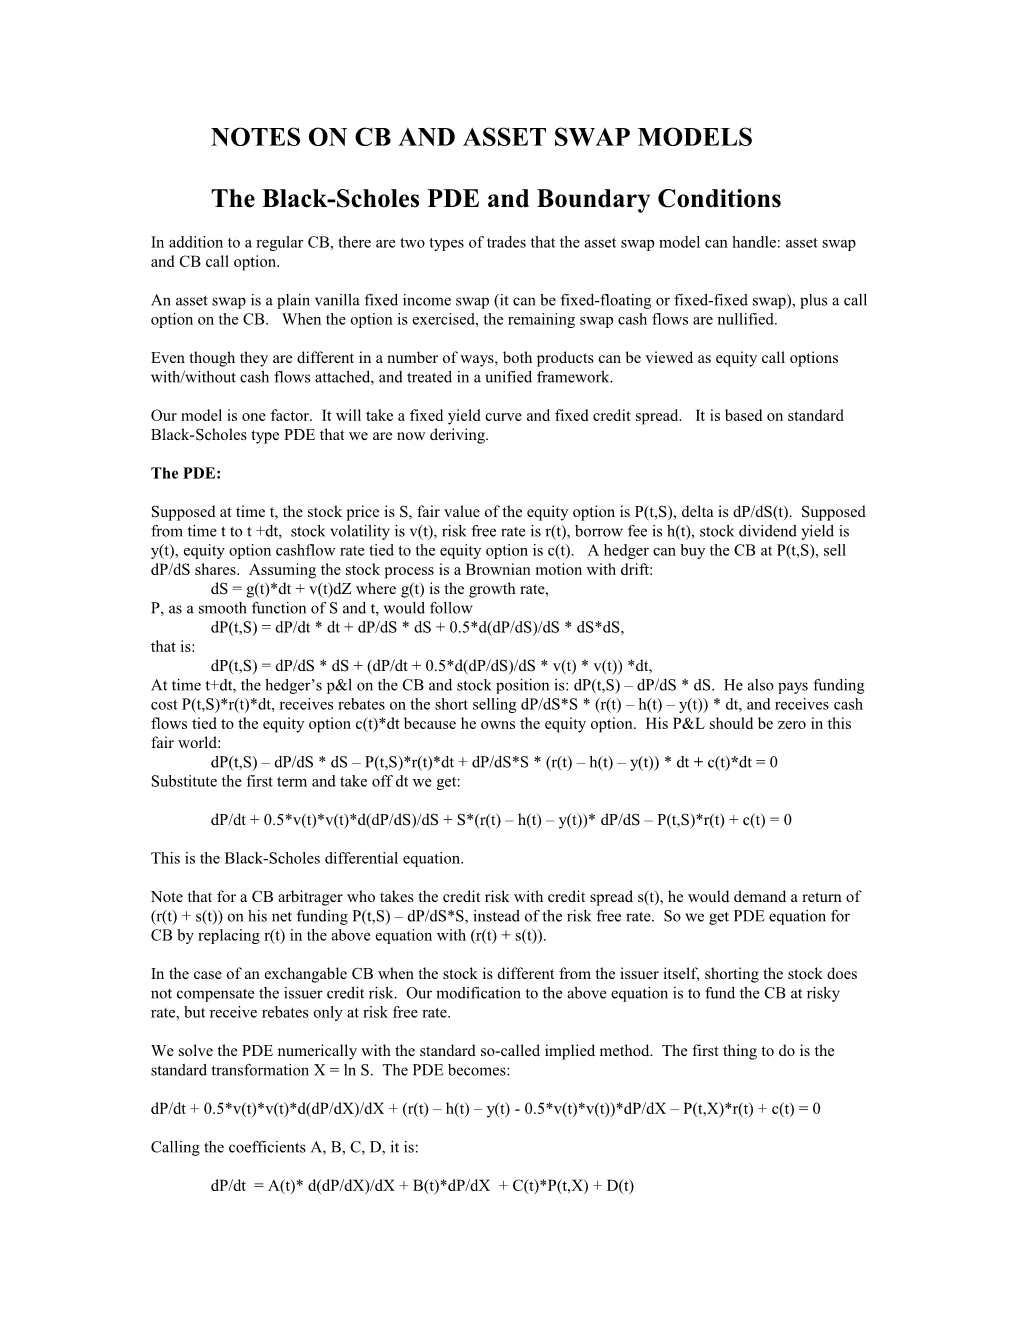 The Black-Scholes PDE and Boundary Conditions